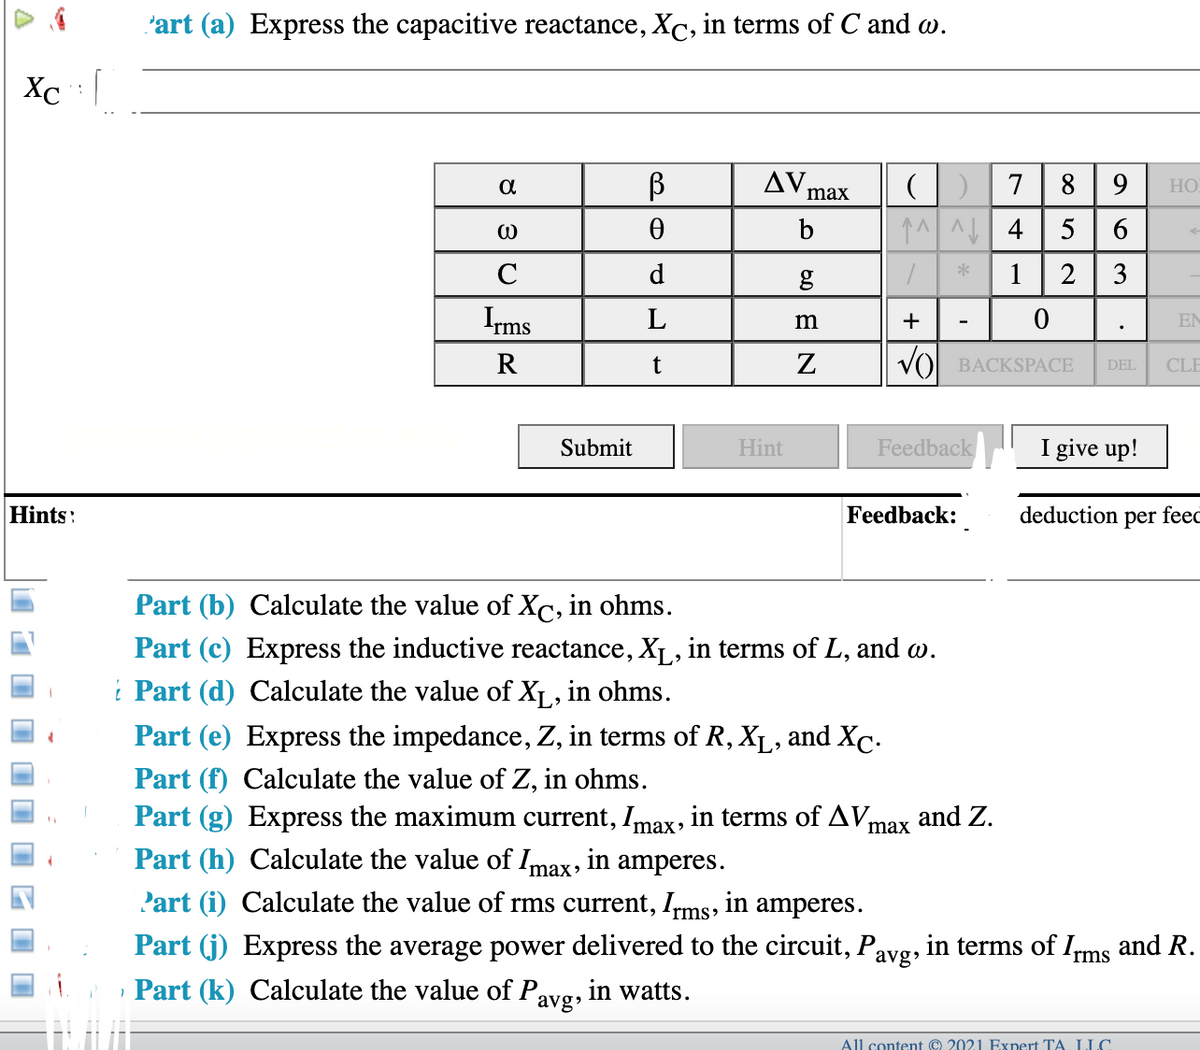 'art (a) Express the capacitive reactance, Xc, in terms of C and w.
Xc : |
AV
8 9
HO
max
b
5
6
C
d
1
2
3
Irms
L
+
EN
R
VO BACKSPACE
CLE
DEL
Submit
Hint
Feedback
I give up!
Hints:
Feedback:
deduction per feec
Part (b) Calculate the value of Xc, in ohms.
Part (c) Express the inductive reactance, XL, in terms of L, and w.
i Part (d) Calculate the value of X1, in ohms.
Part (e) Express the impedance, Z, in terms of R, XL, and Xc.
Part (f) Calculate the value of Z, in ohms.
Part (g) Express the maximum current, Imax, in terms of AVm
Part (h) Calculate the value of Imax, in amperes.
and Z.
max
Part (i) Calculate the value of rms current, Ims, in amperes.
Part (j) Express the average power delivered to the circuit, Pavg, in terms of Ims and R.
, Part (k) Calculate the value of Pavg,
in watts.
All content © 2021 Expert TA. LLC
